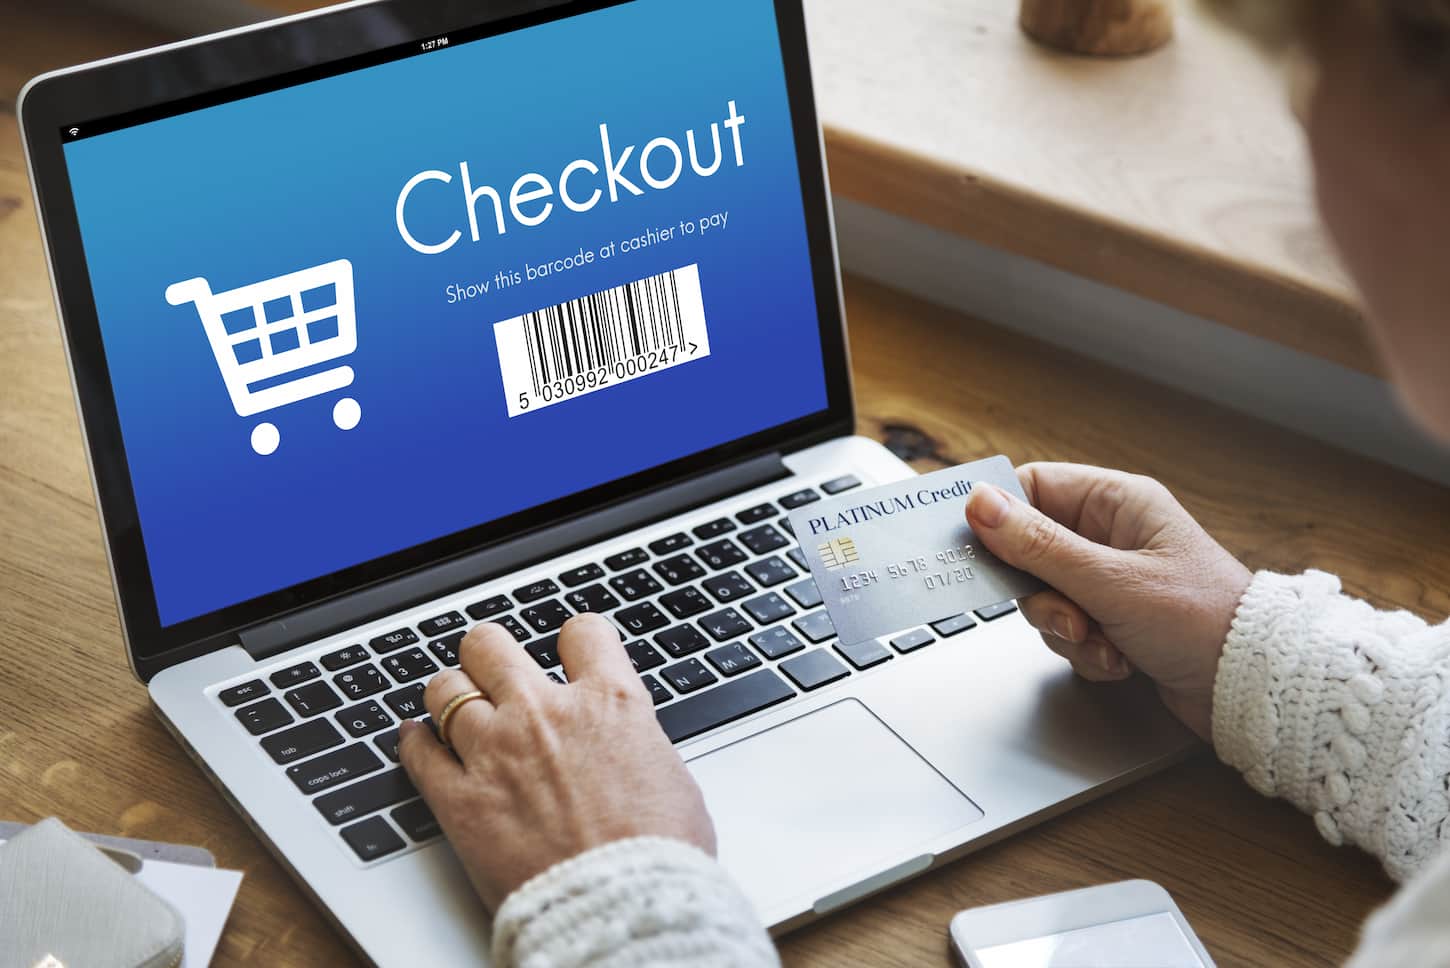 An image of a person holding a credit card in front of a laptop checking out an online purchase.